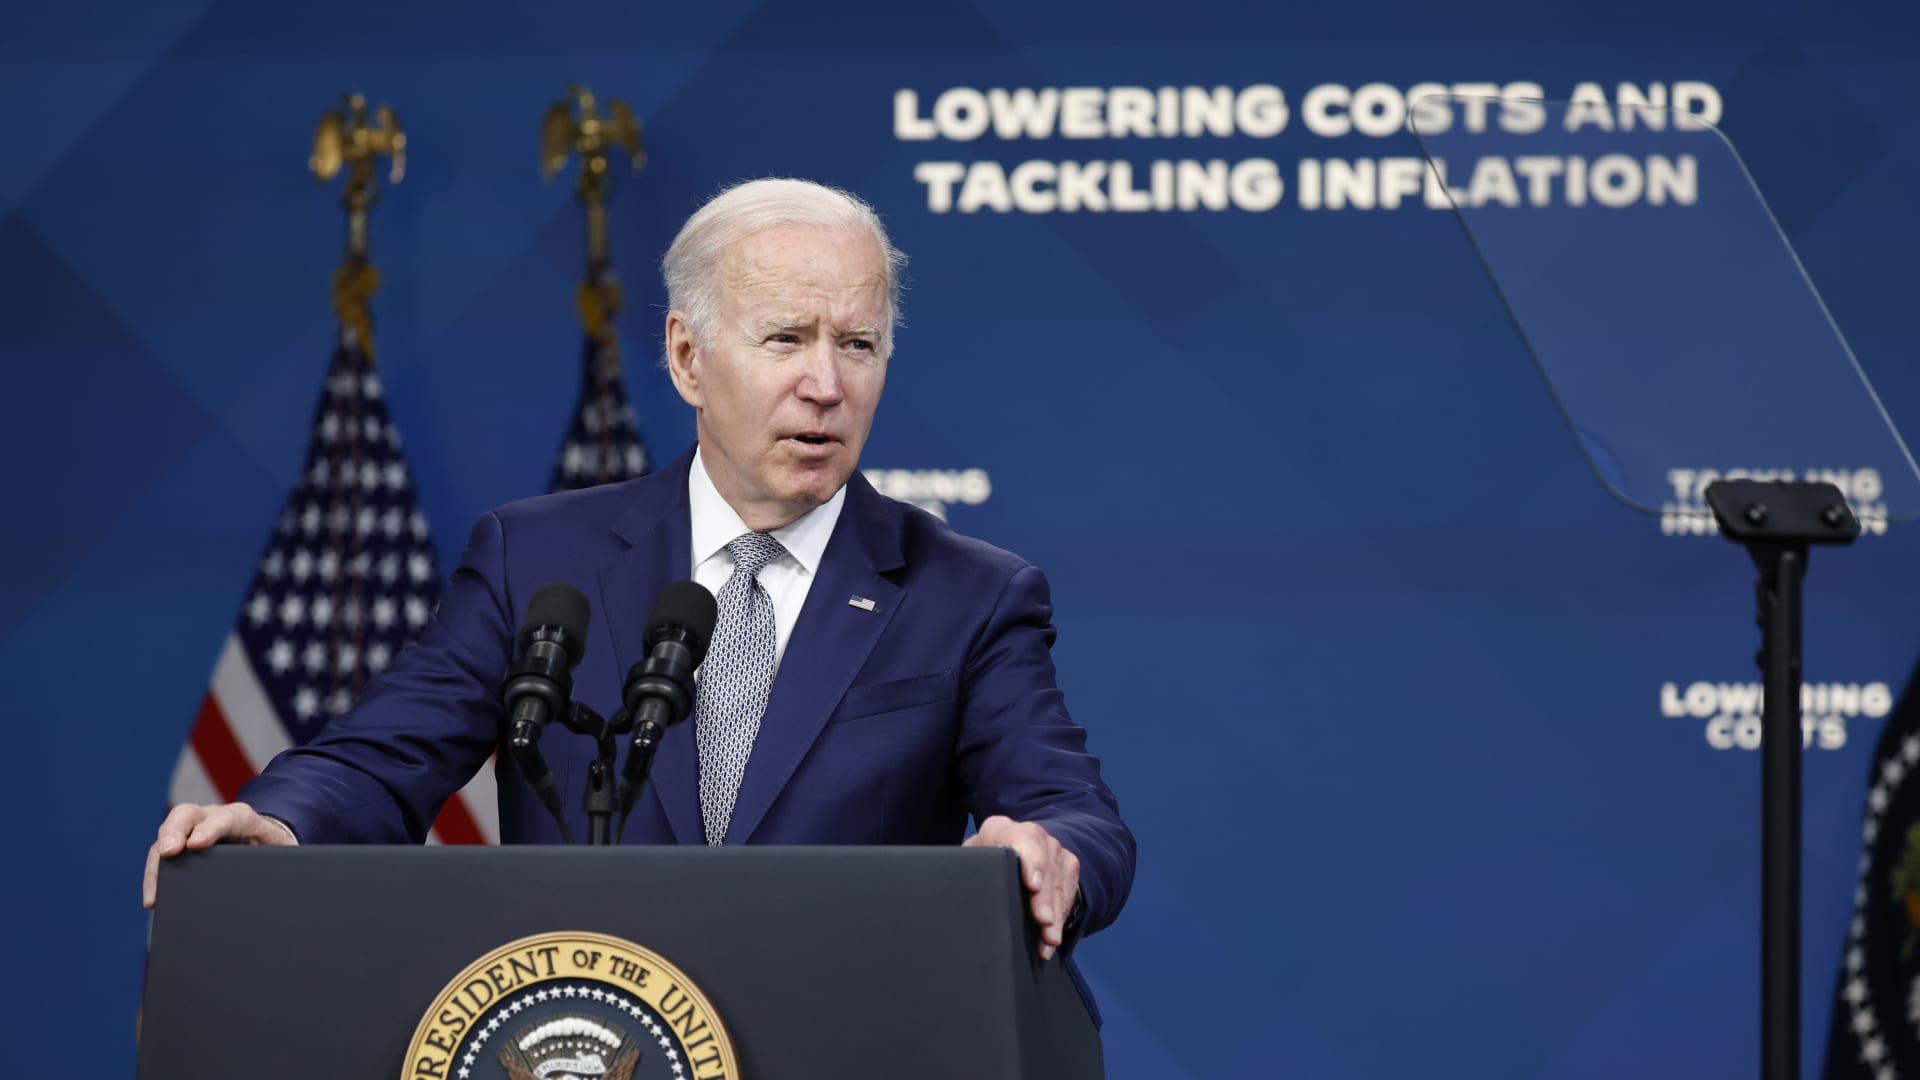 Biden says White House could drop Trump China tariffs to lower consumer prices